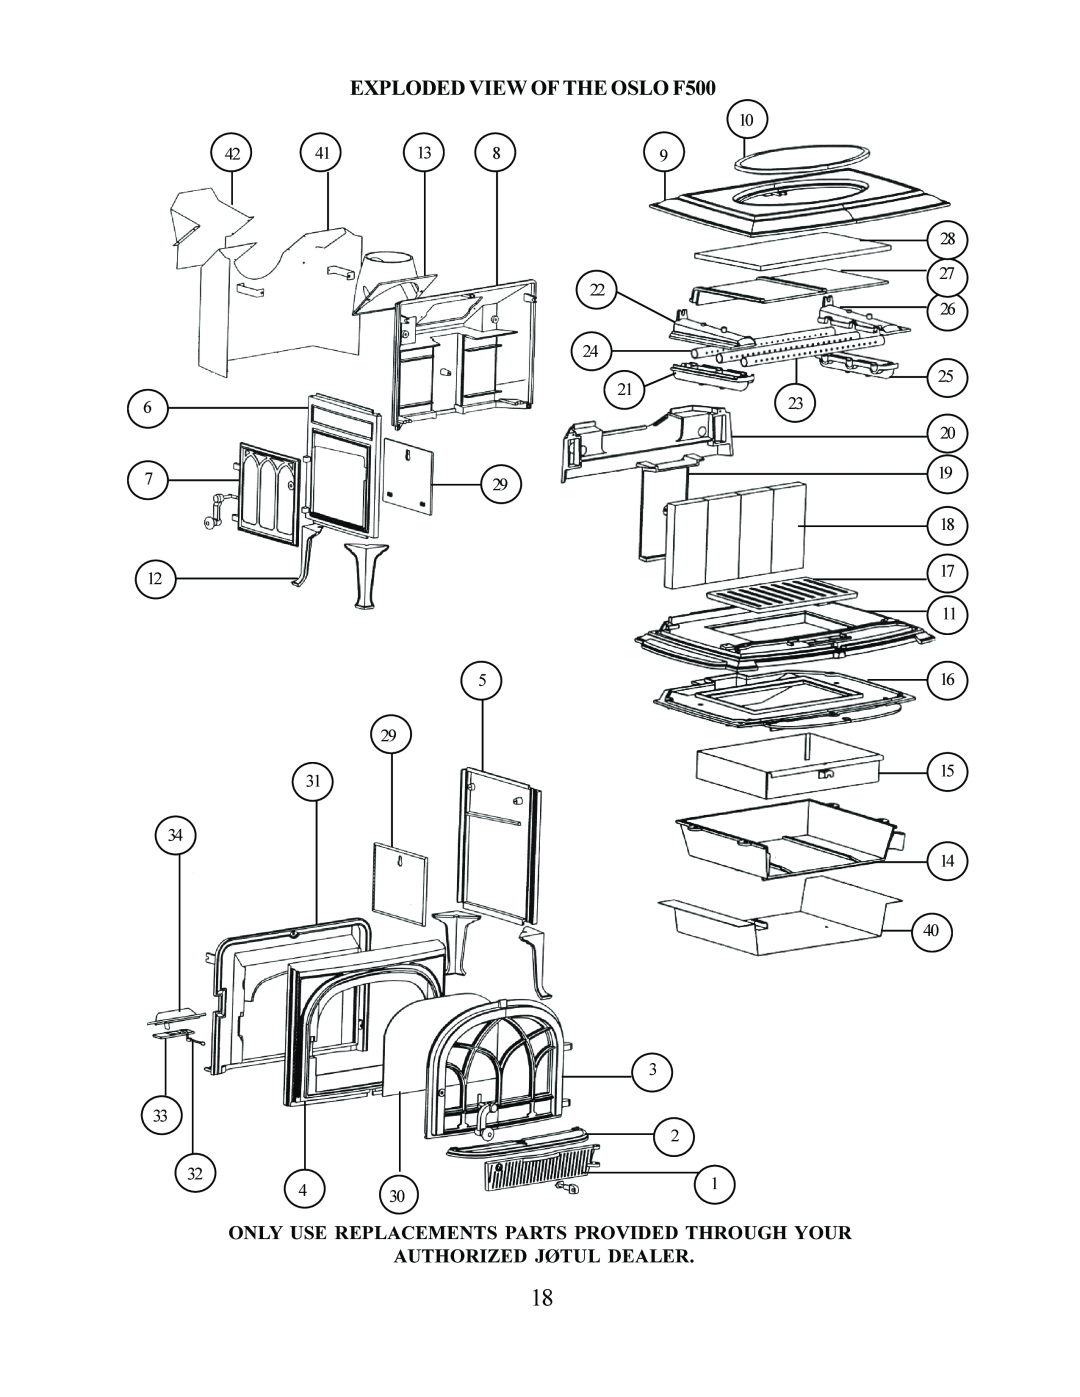 Jotul F 500 EXPLODED VIEW OF THE OSLO F500, Only Use Replacements Parts Provided Through Your, Authorized Jøtul Dealer 